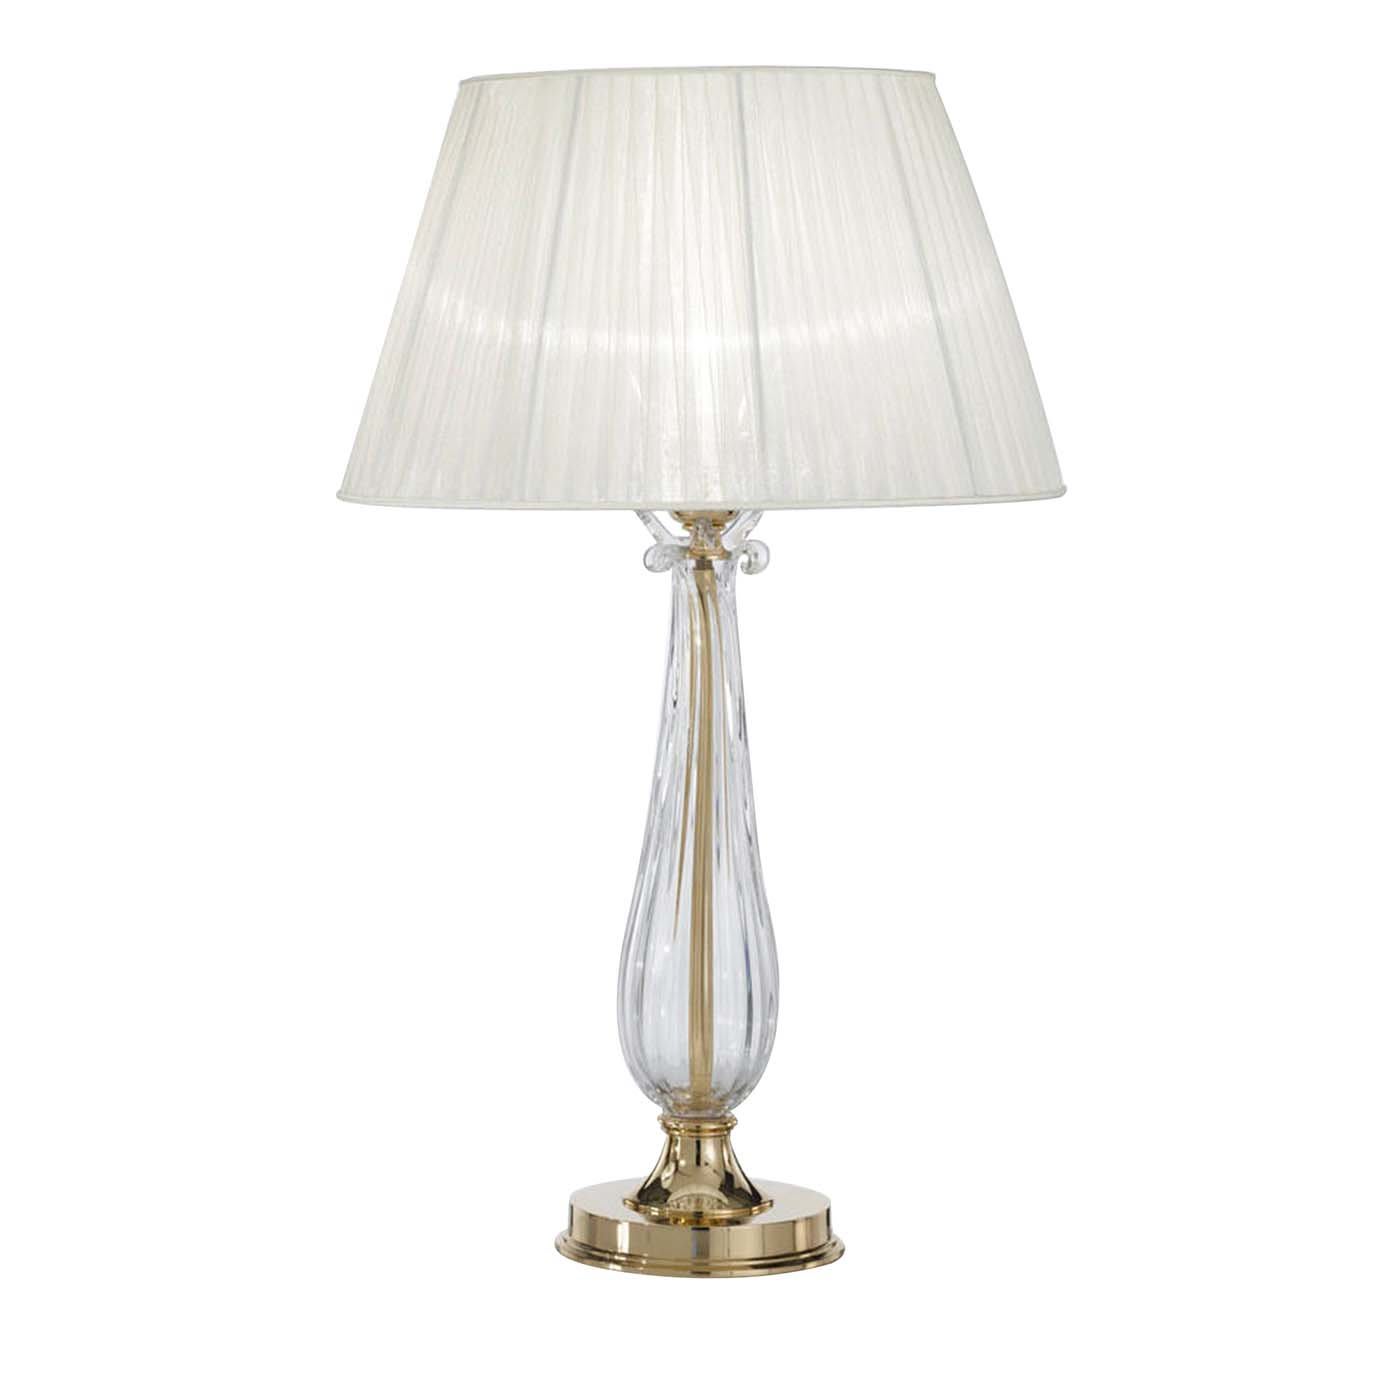 Gold and Crystal Table Lamp with Organza Shade - Possoni Illuminazione